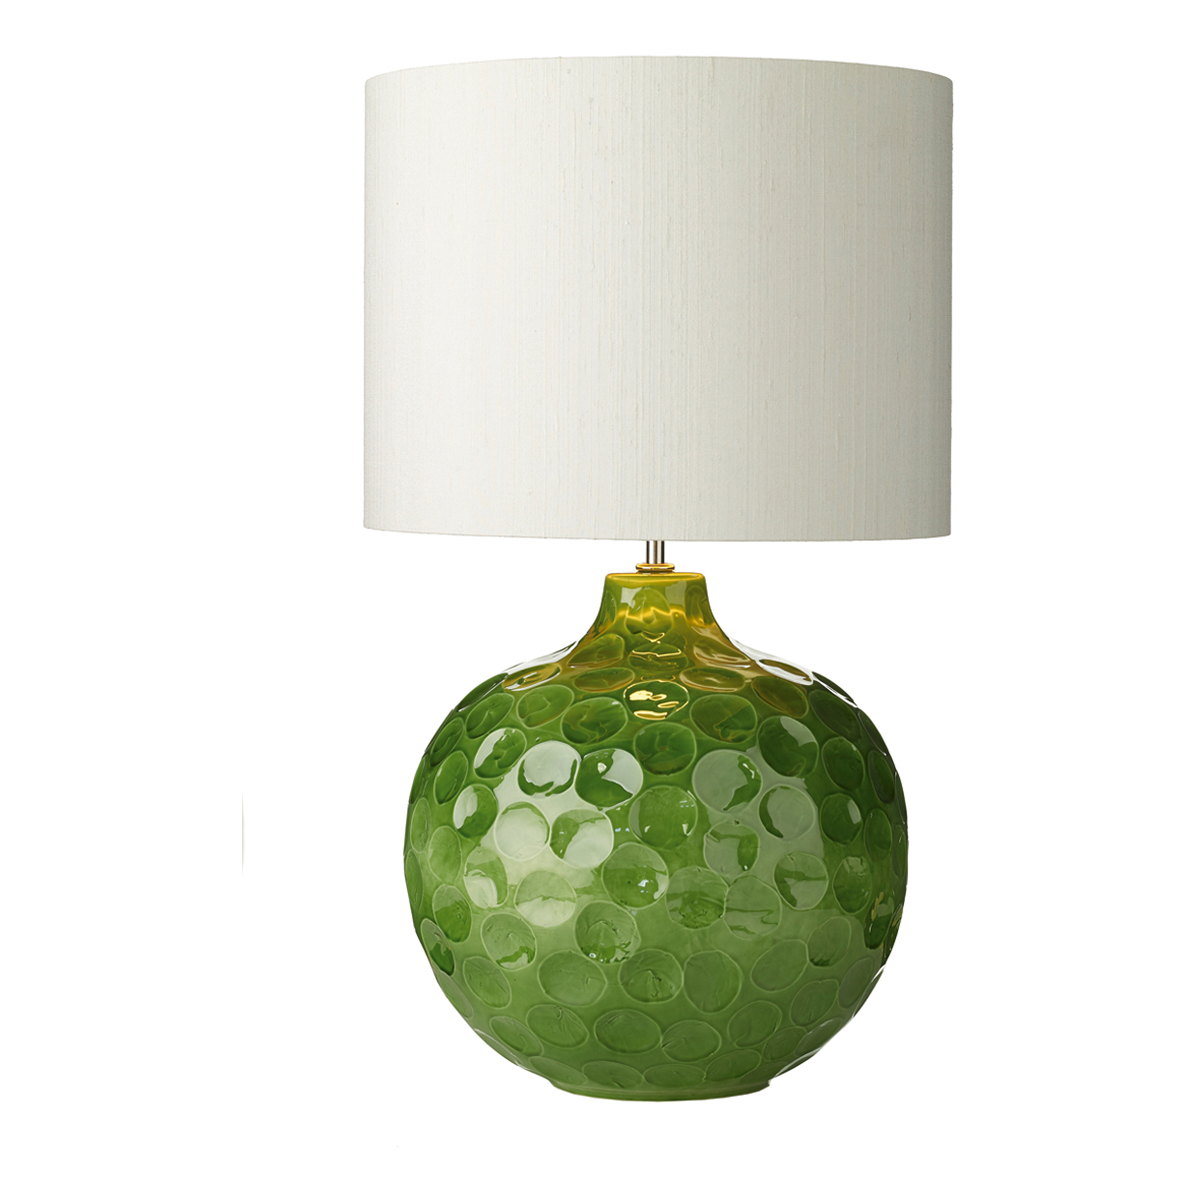 Odyssey Table Lamp Ceramic Base Only, Table Lamps Green